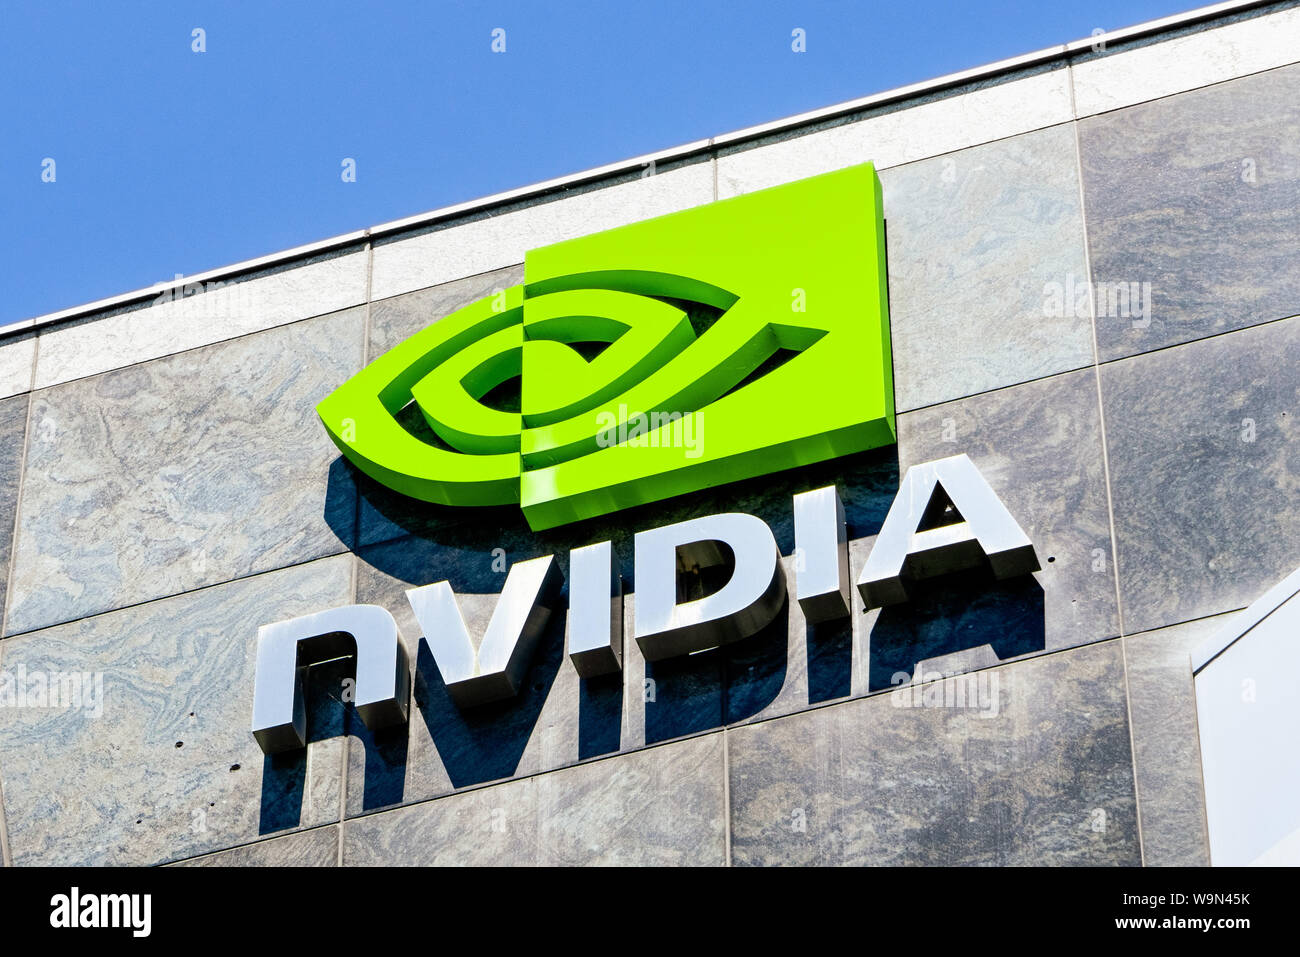 August 9, 2019 Santa Clara / CA / USA - The NVIDIA logo and symbol  displayed on the facade of one of their office buildings located in the  Company's c Stock Photo - Alamy